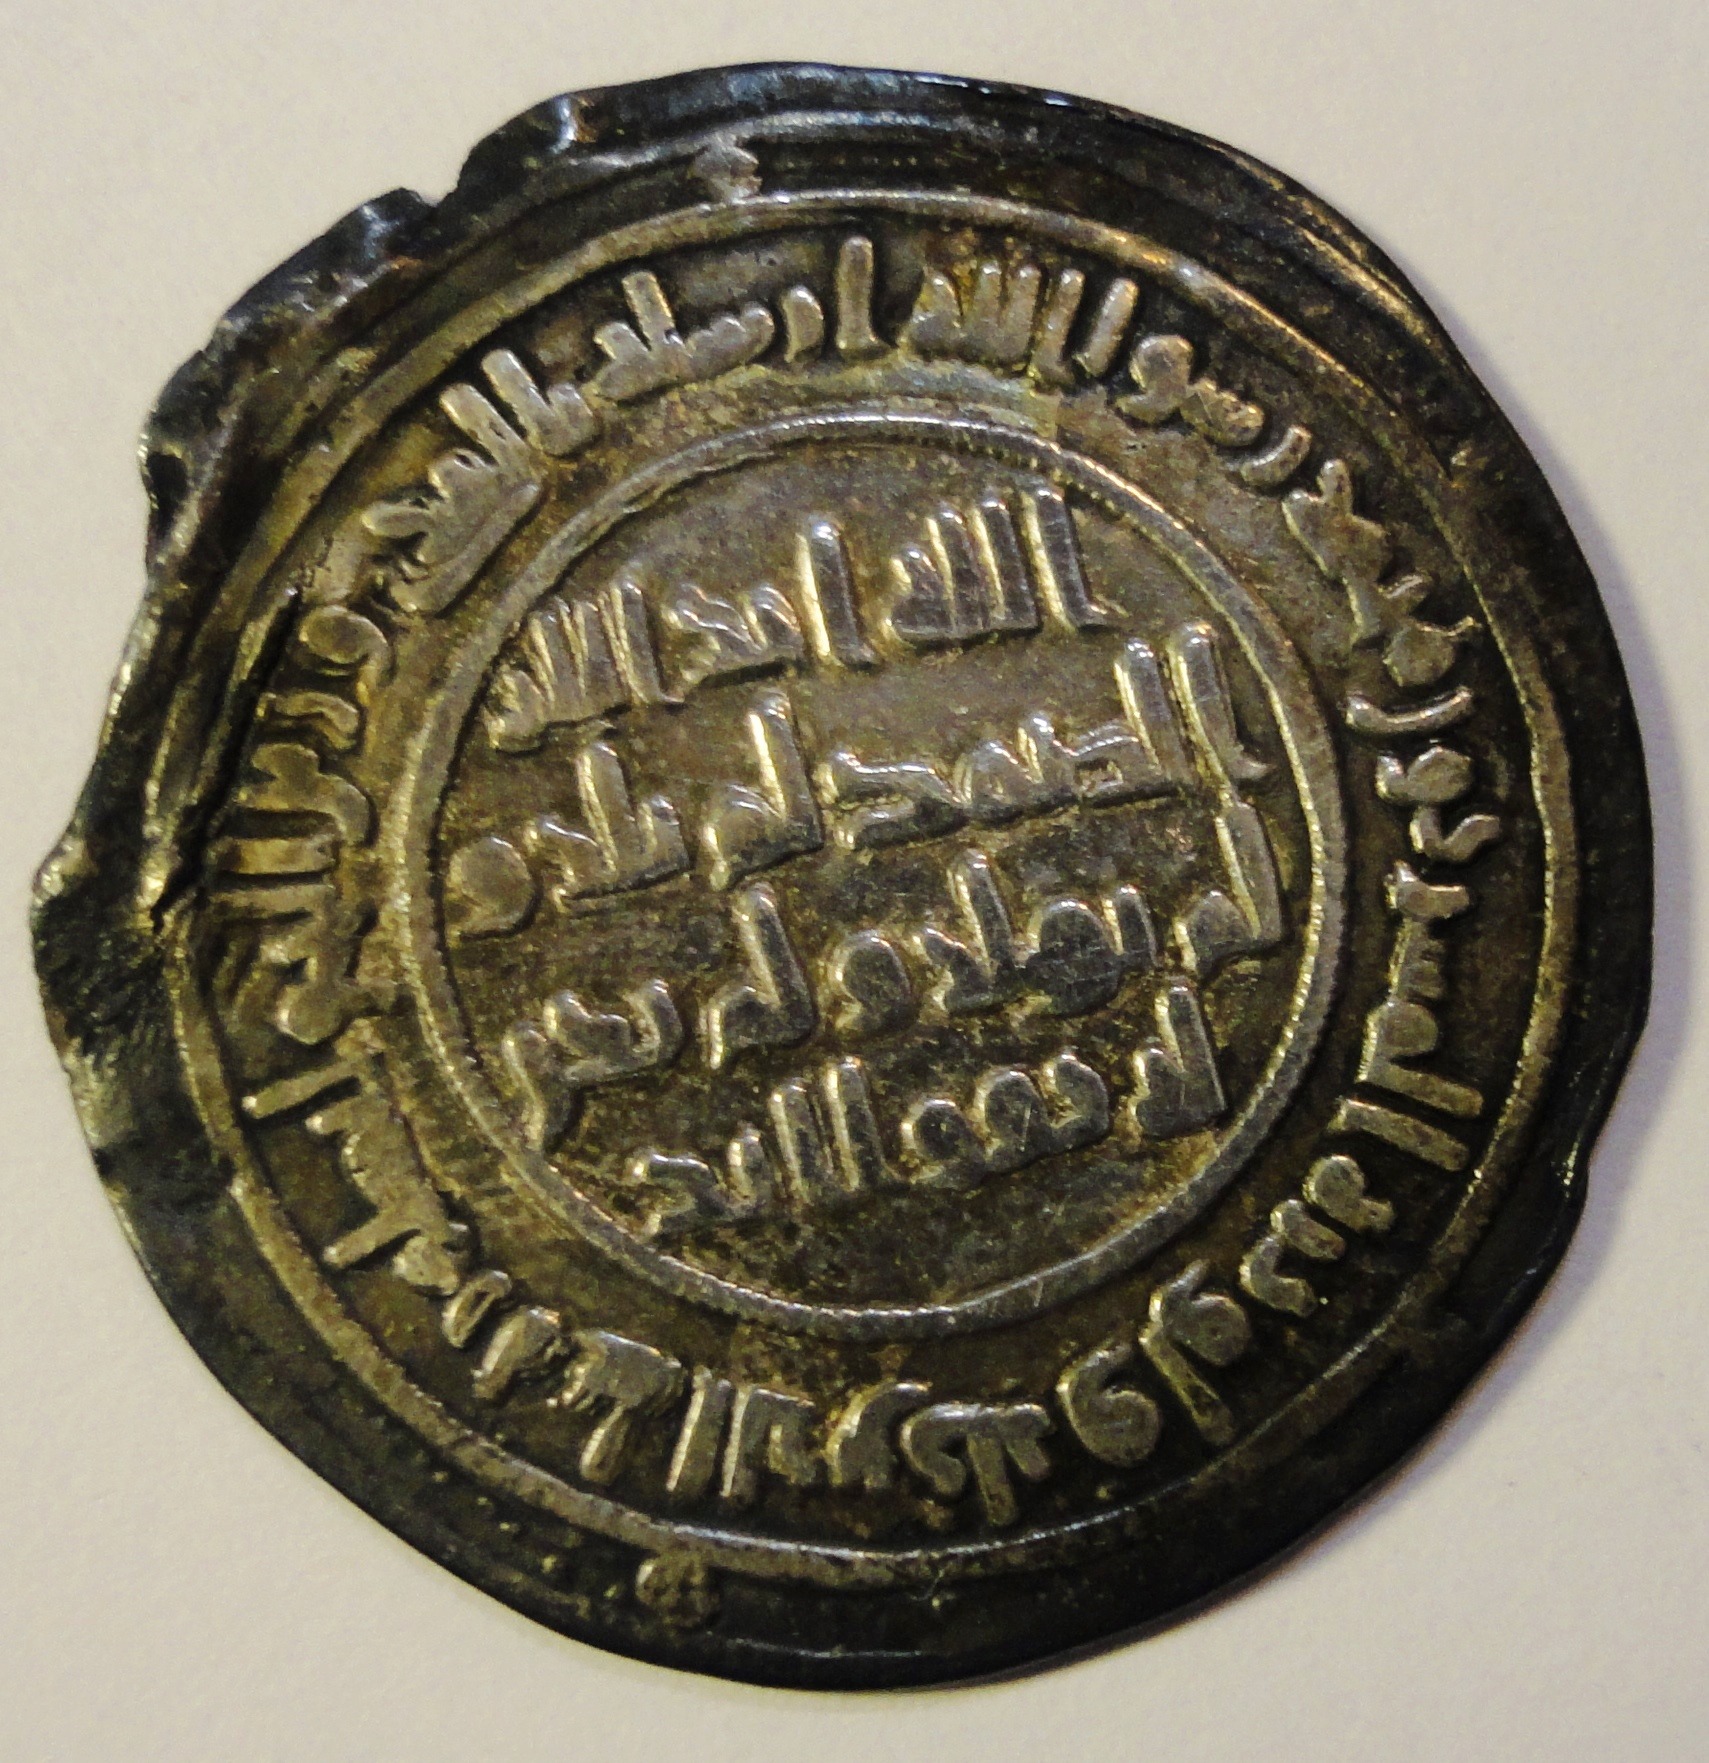 Museum’s Oldest Coin Minted in 699AD